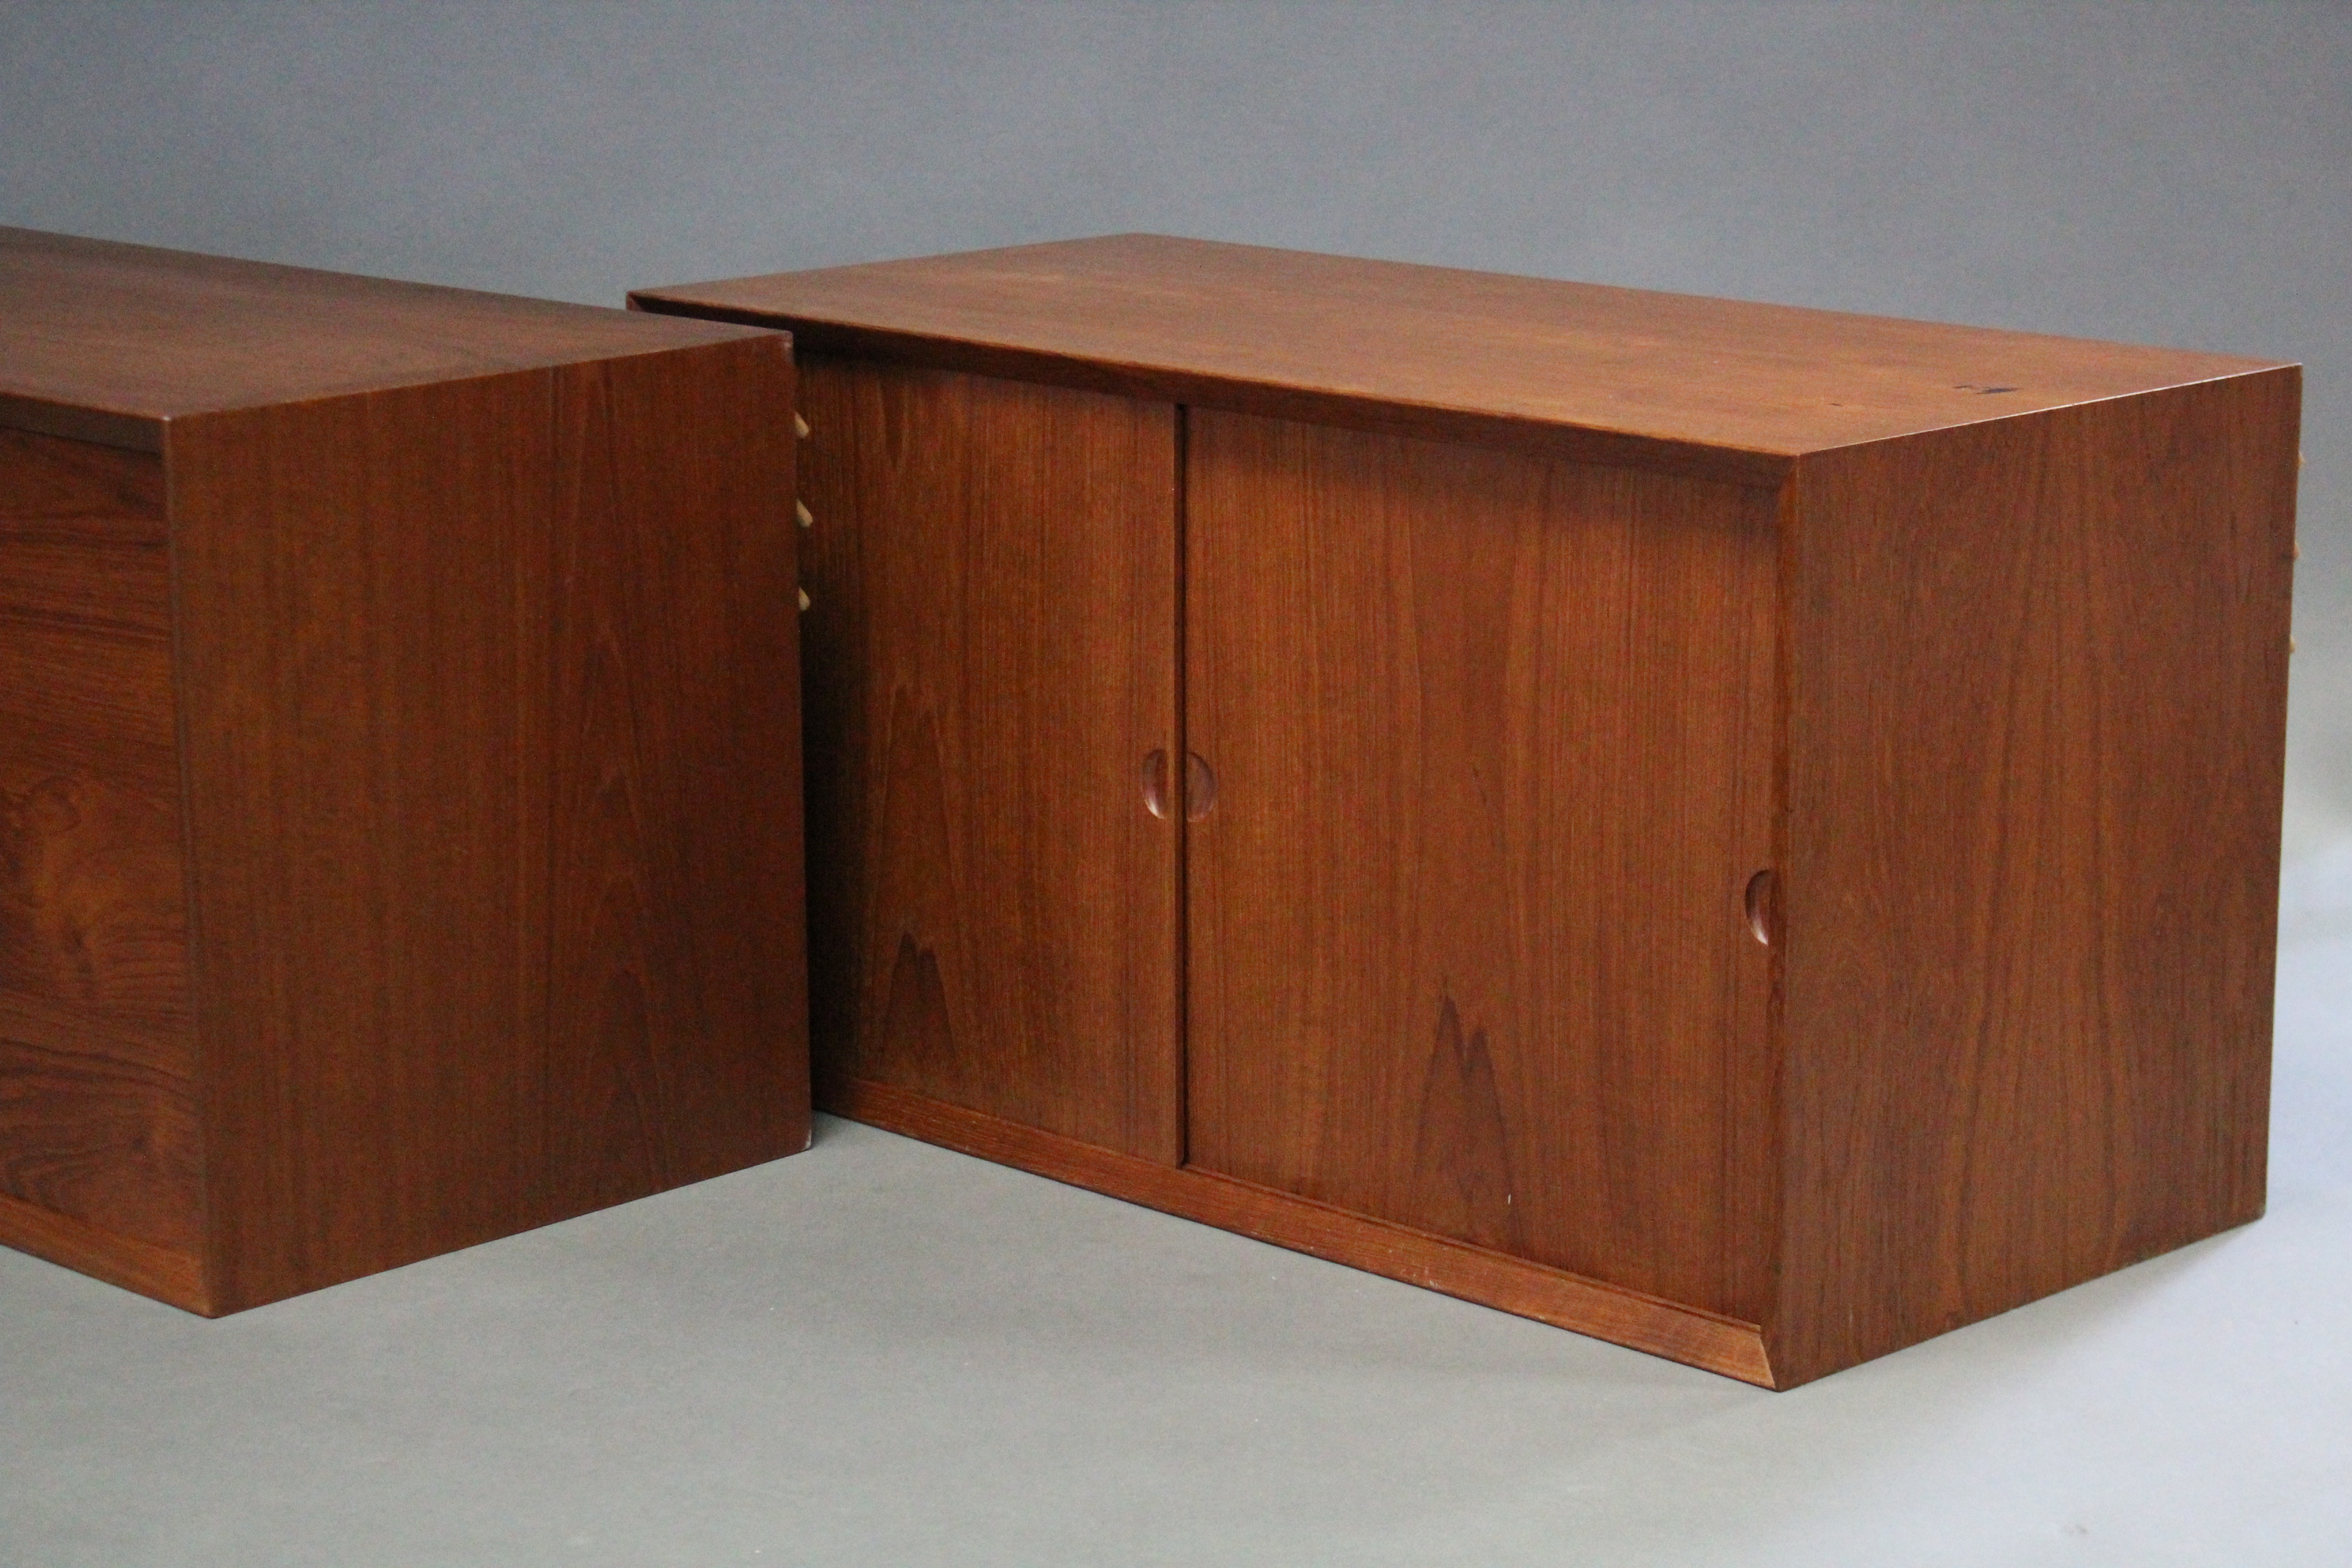 A 1960’s DANISH TEAK MODULAR INTER-CHANGEABLE WALL UNIT DESIGNED BY POUL CADOVIUS, fitted with an - Image 8 of 12